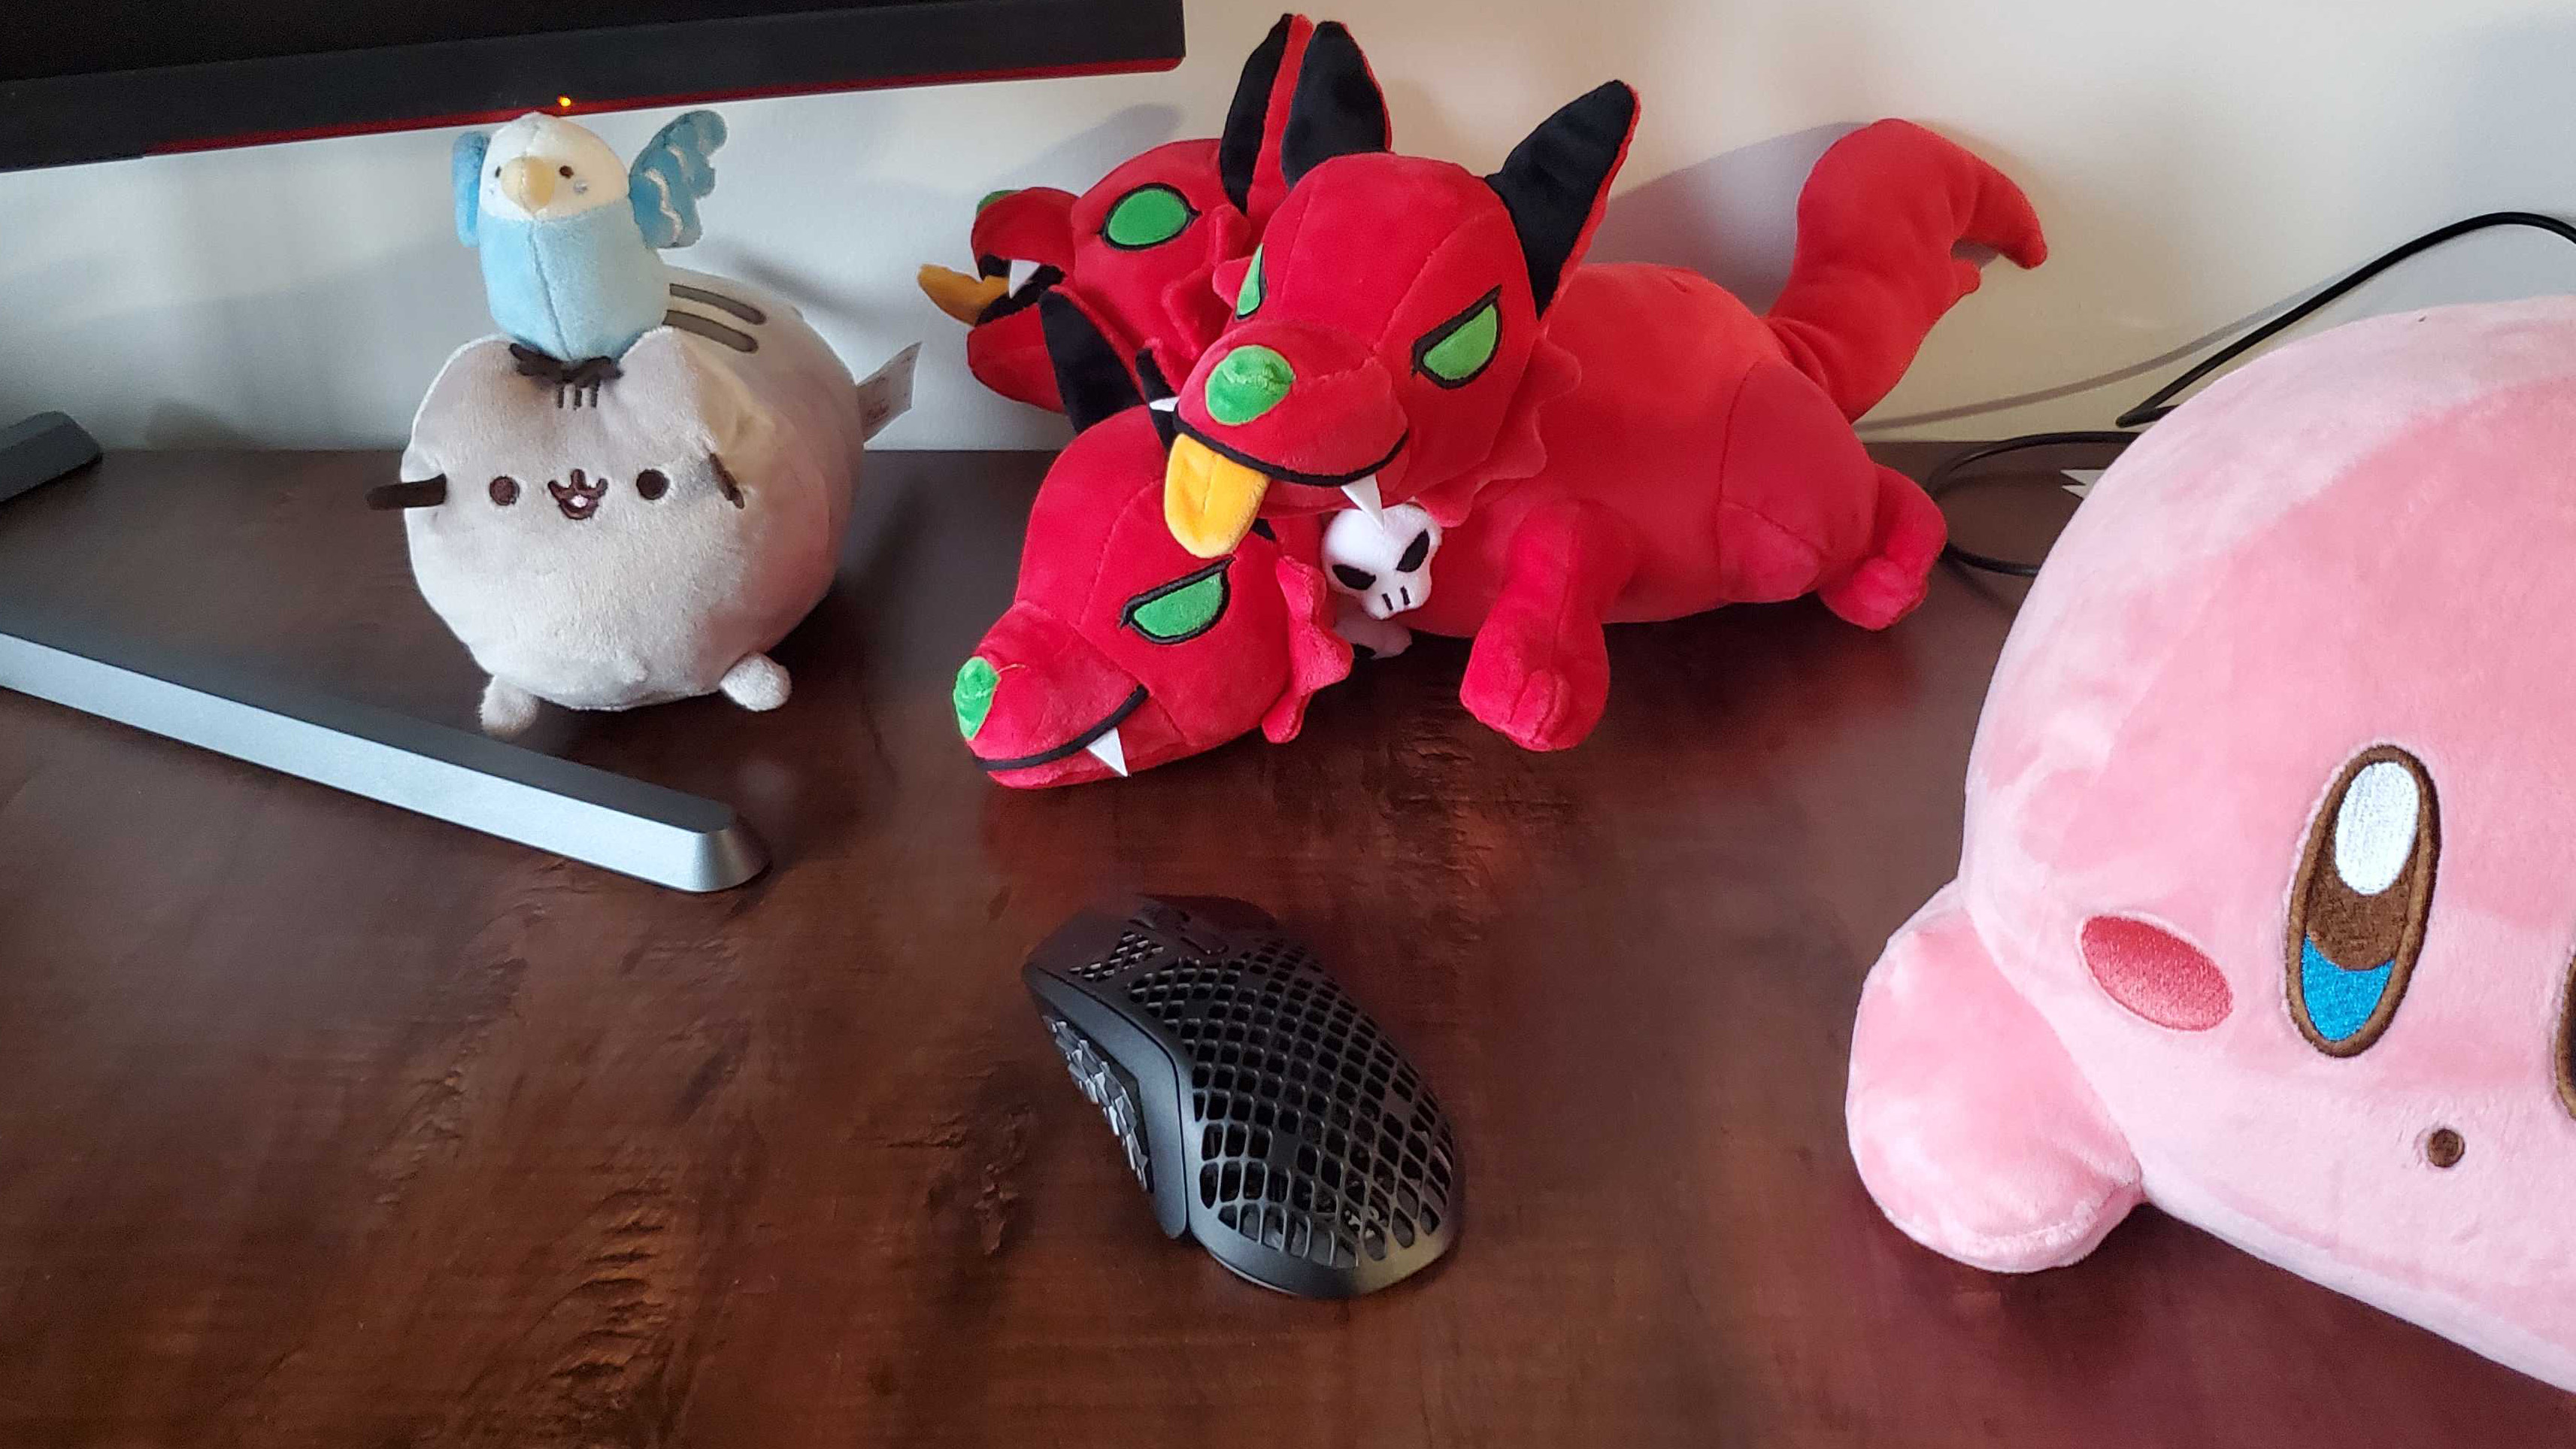 SteelSeries Aerox 9 on a dark wood desk next to some plushies